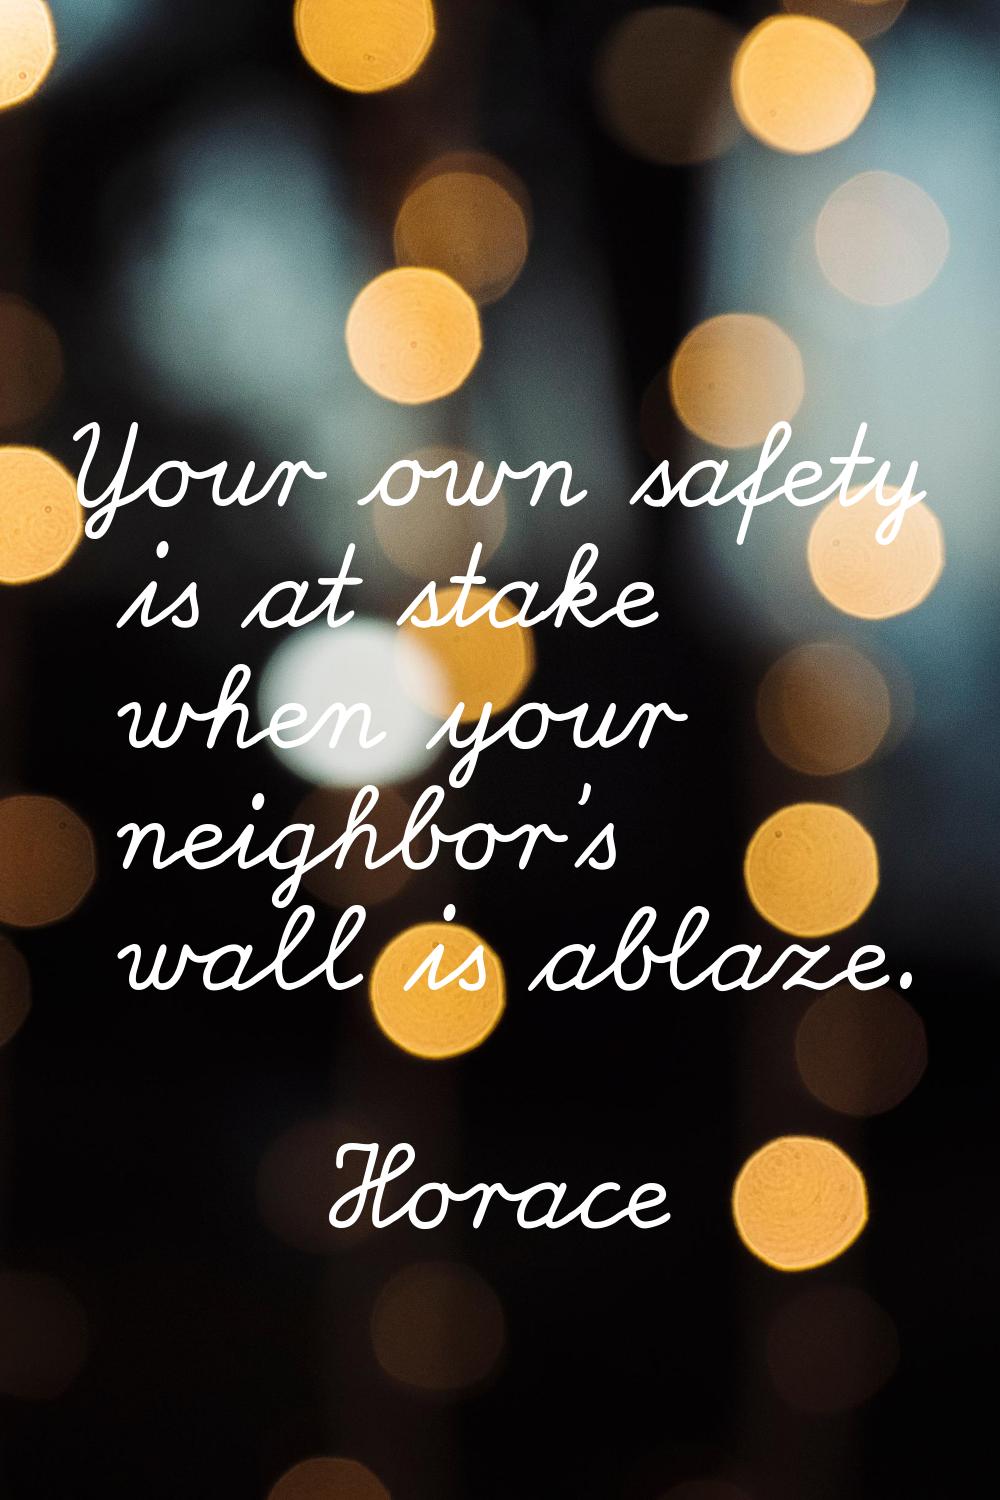 Your own safety is at stake when your neighbor's wall is ablaze.